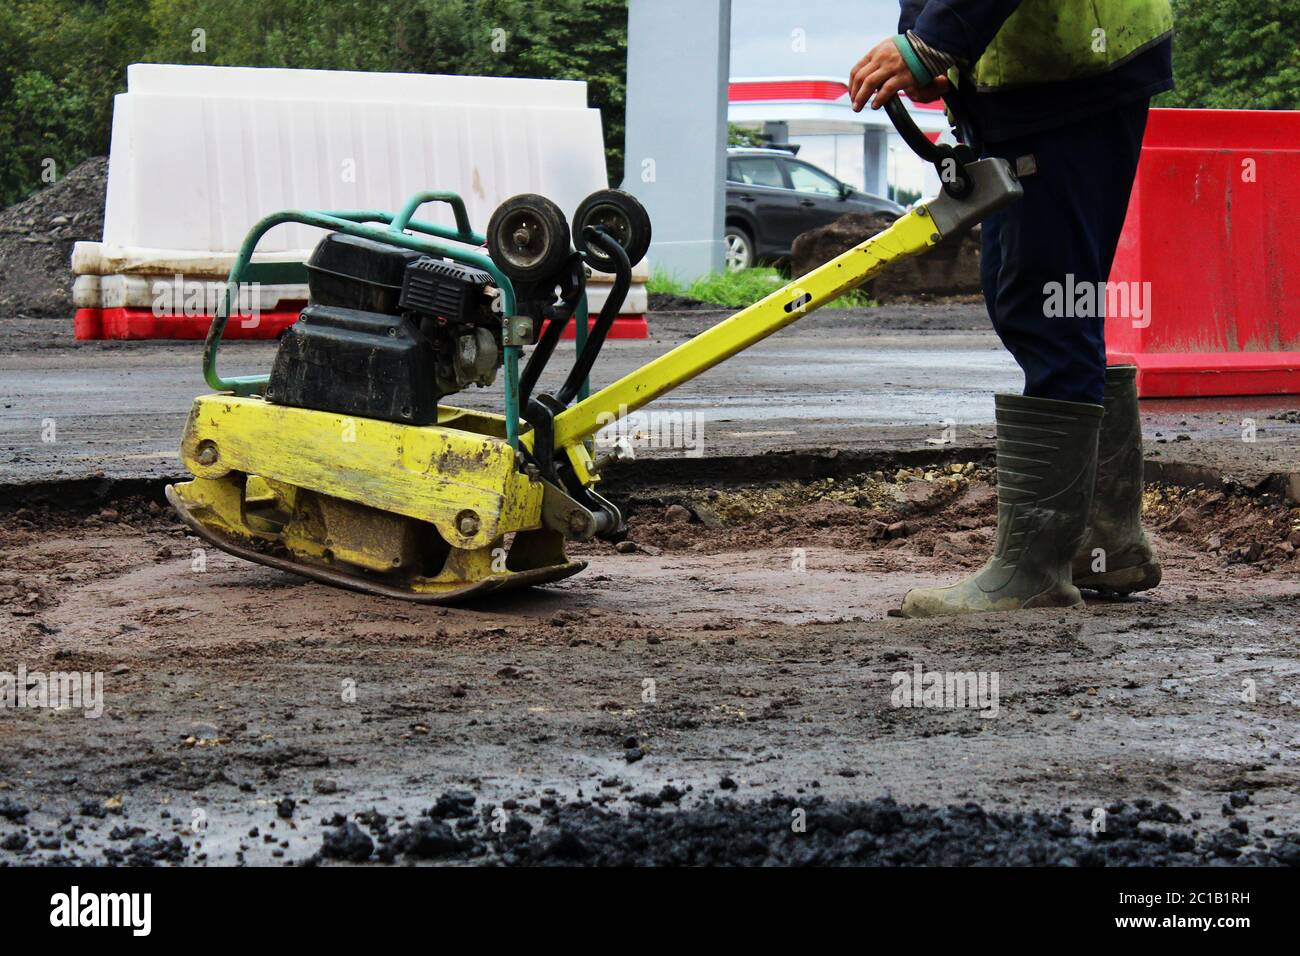 A road construction worker compacts the soil with a compact vibroplate before asphalting a problematic swampy section of the roa Stock Photo